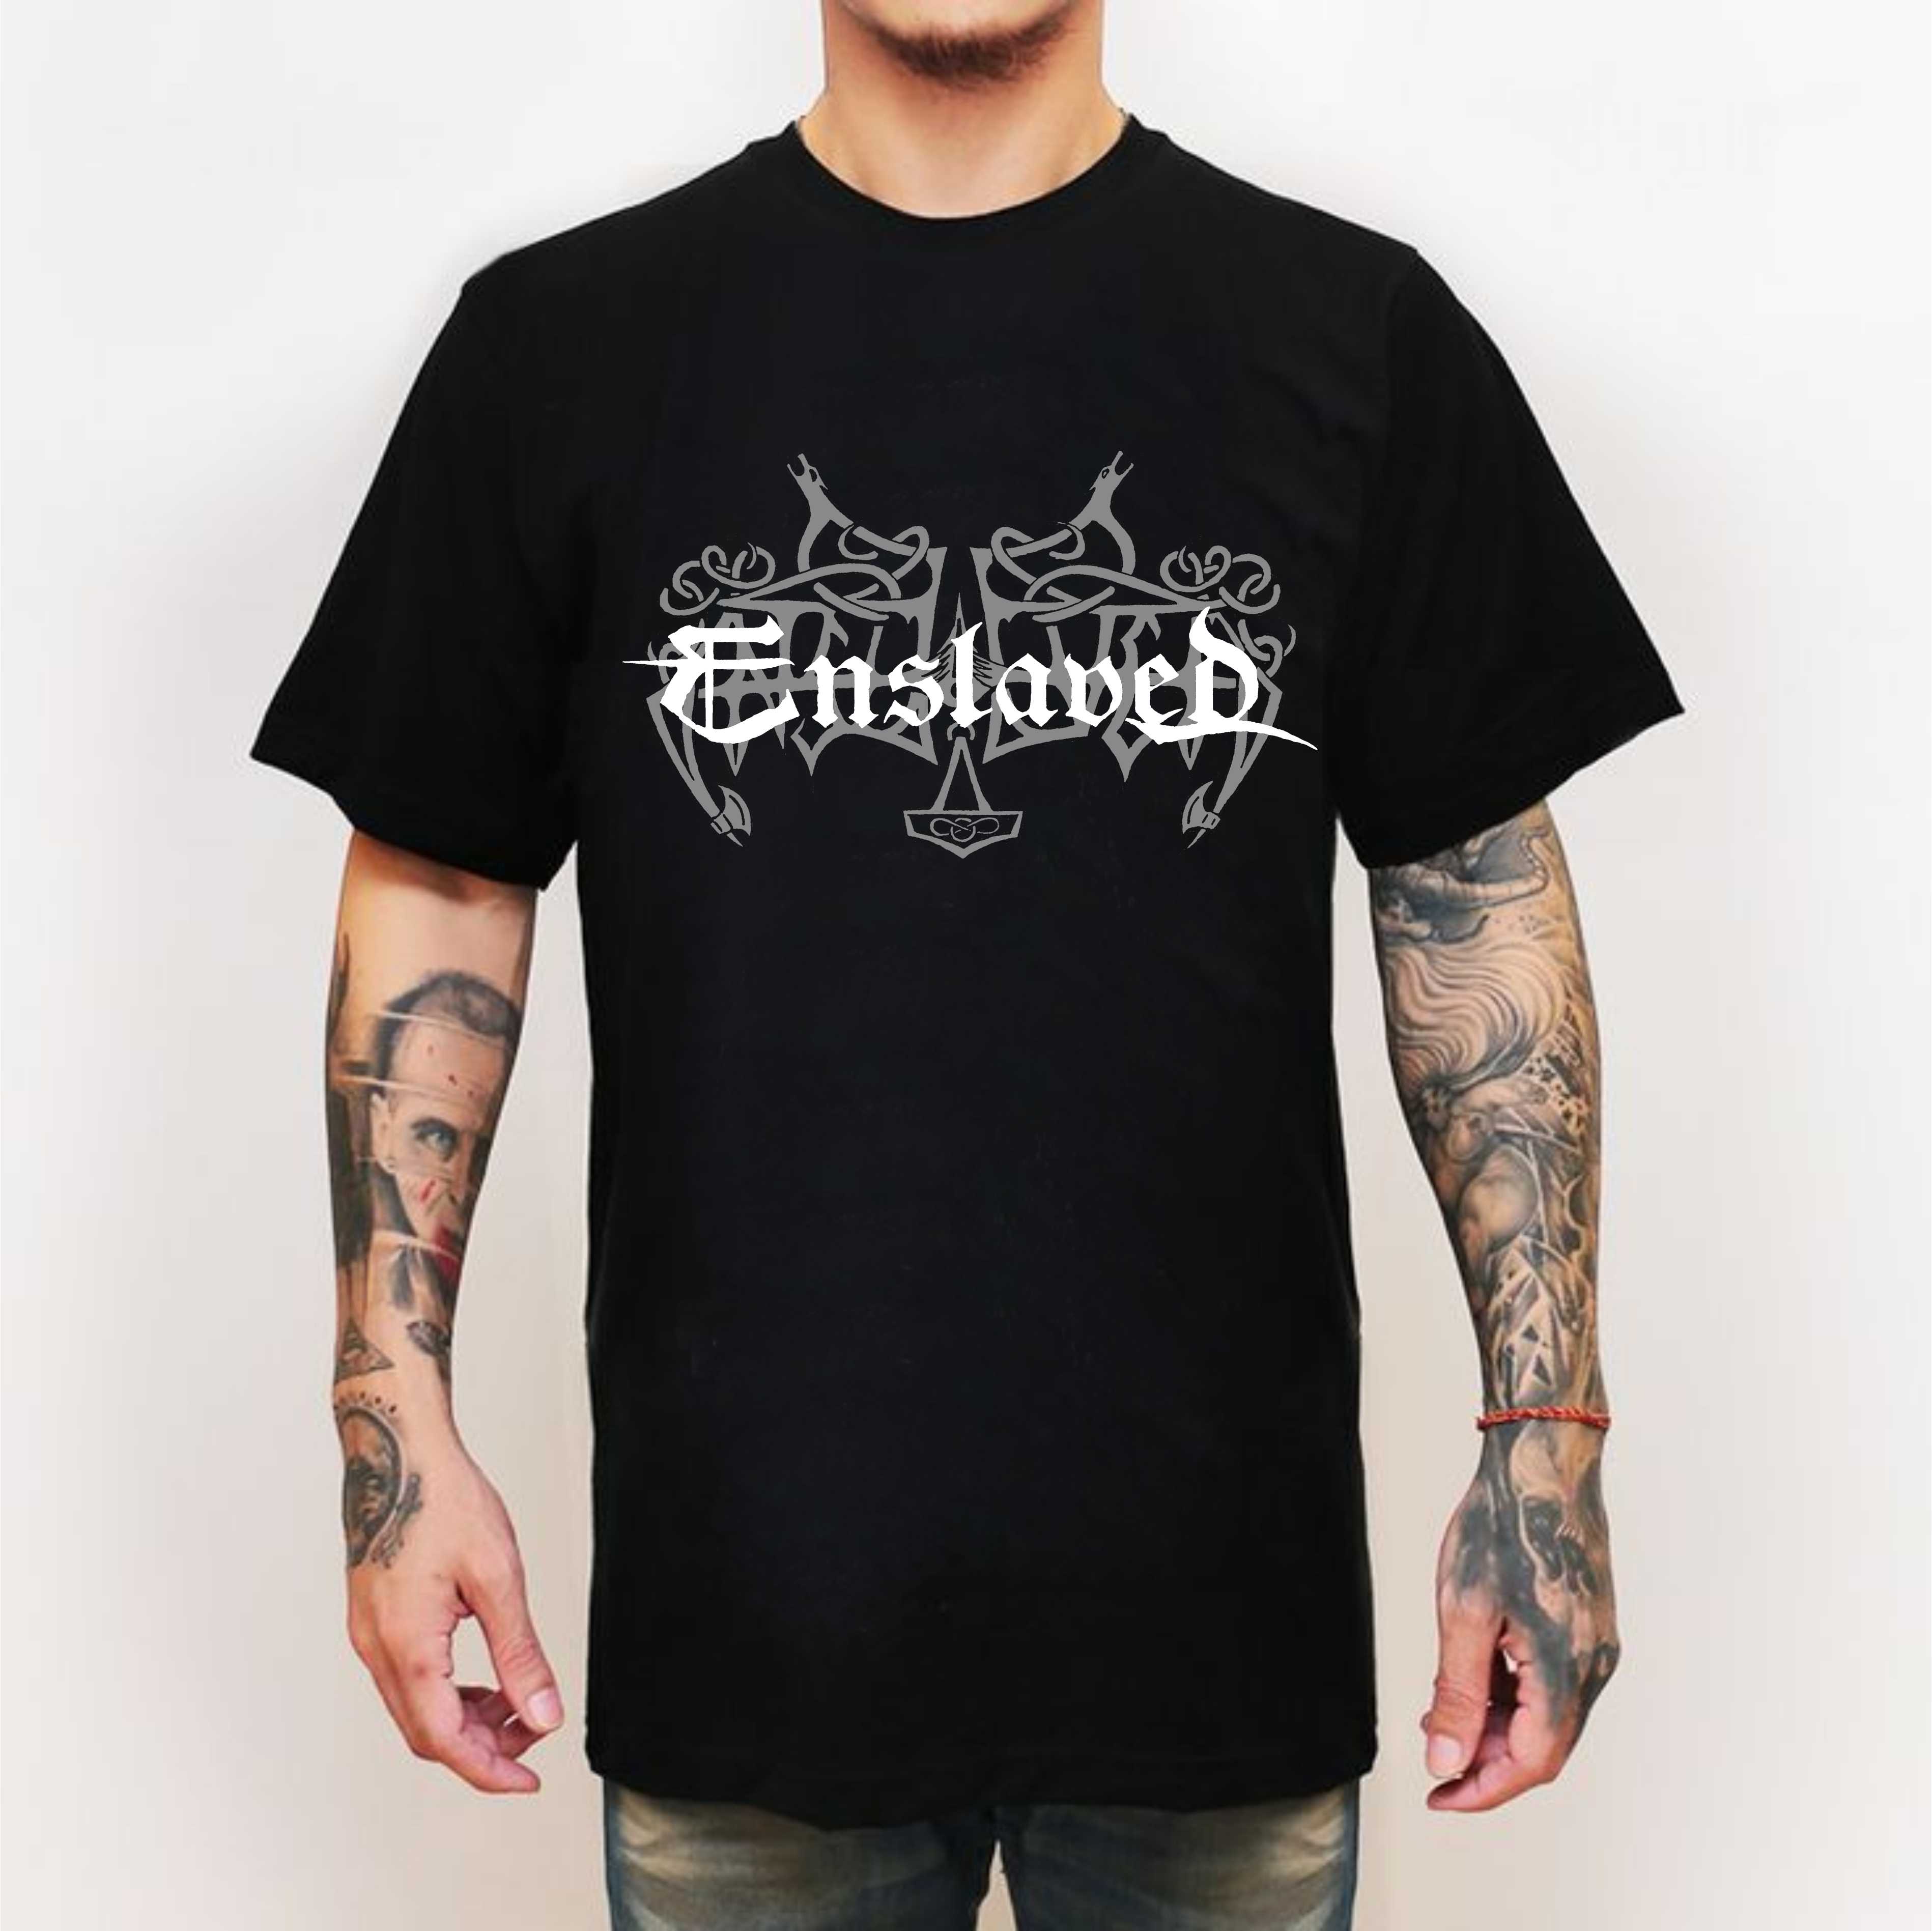 Enslaved Clothing Jeans - Clothes News